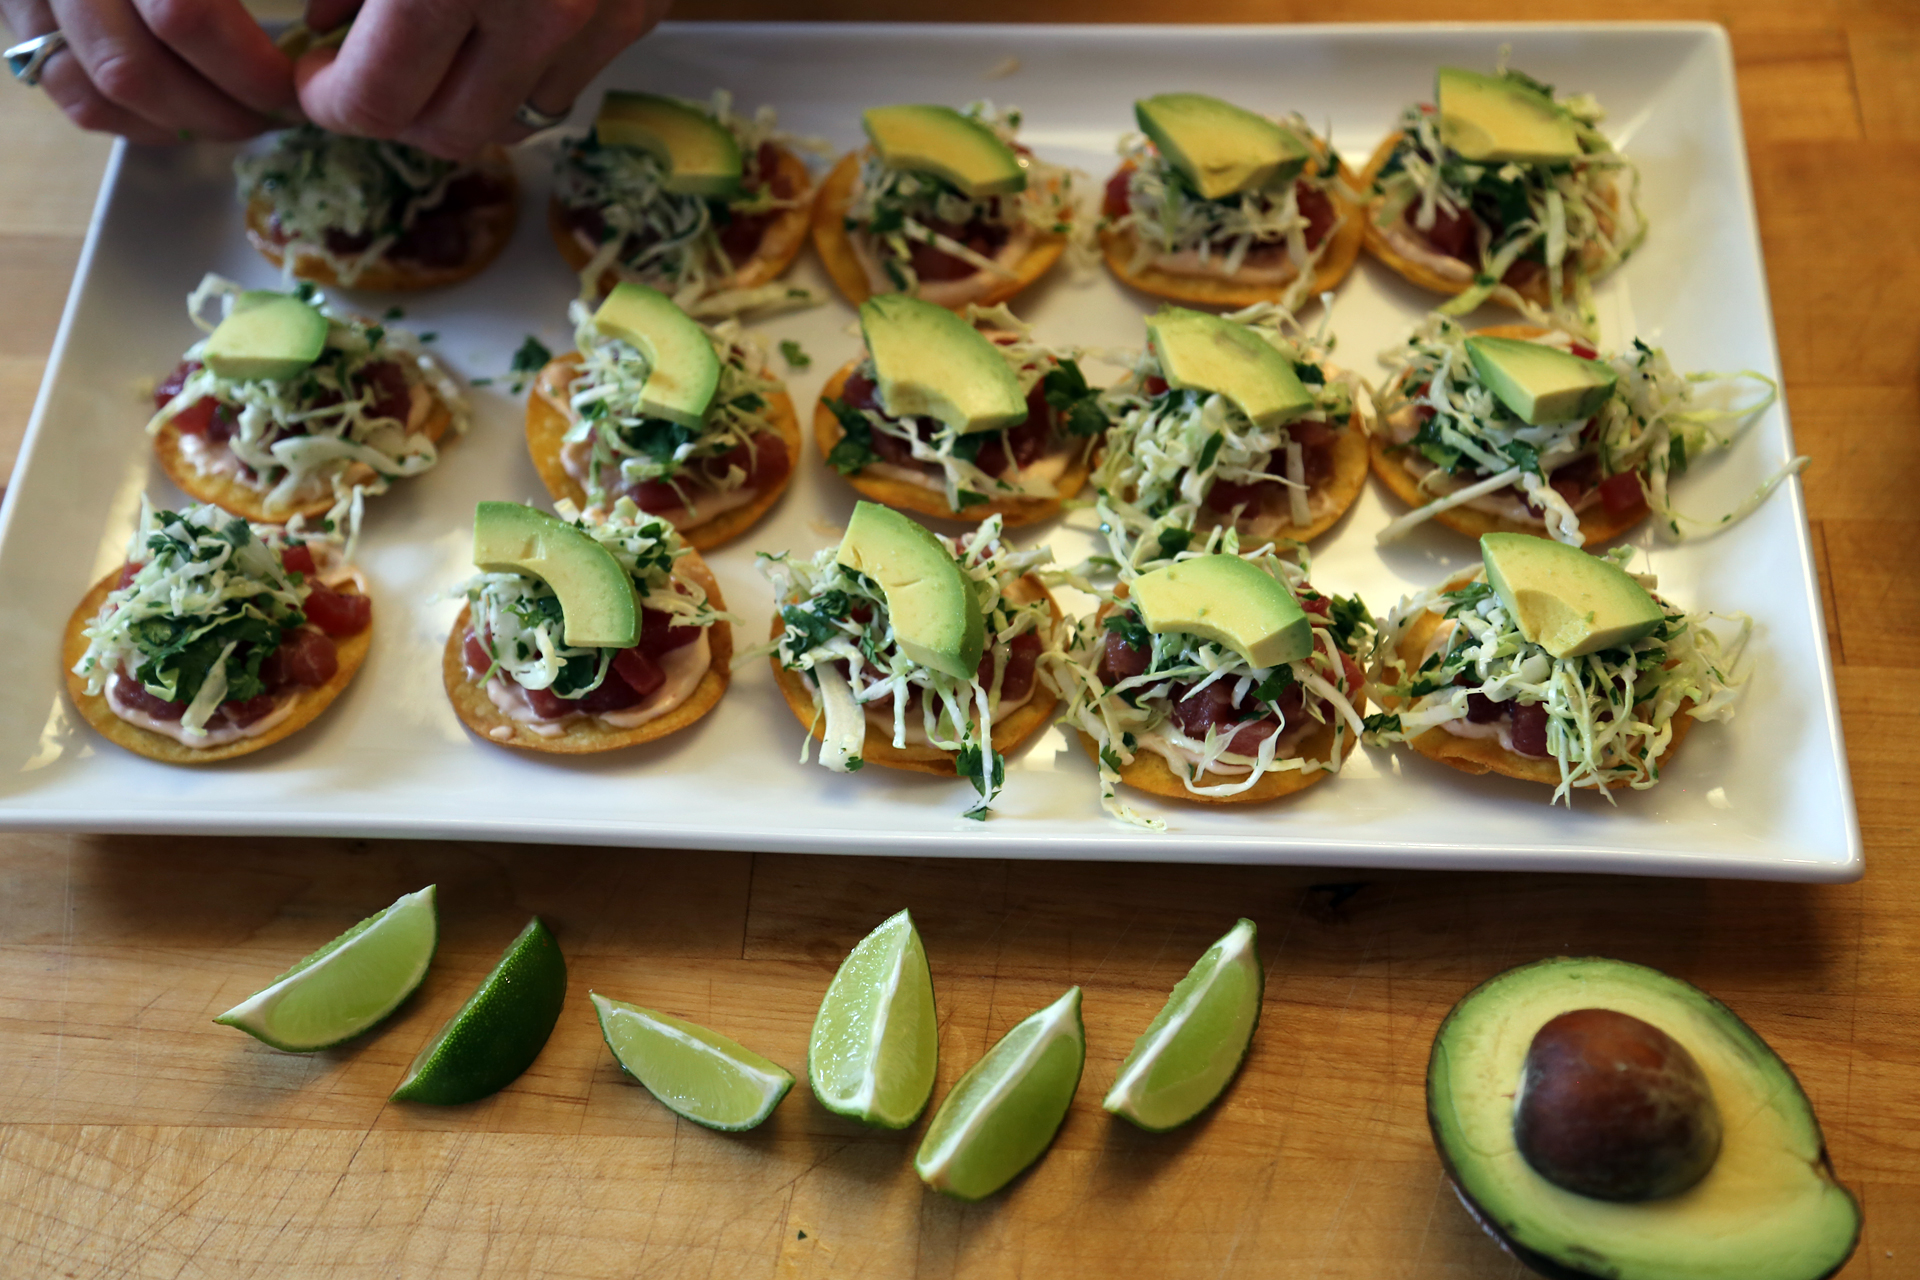 Add a slice of avocado to each tostada. Serve with the lime wedges alongside for squeezing.